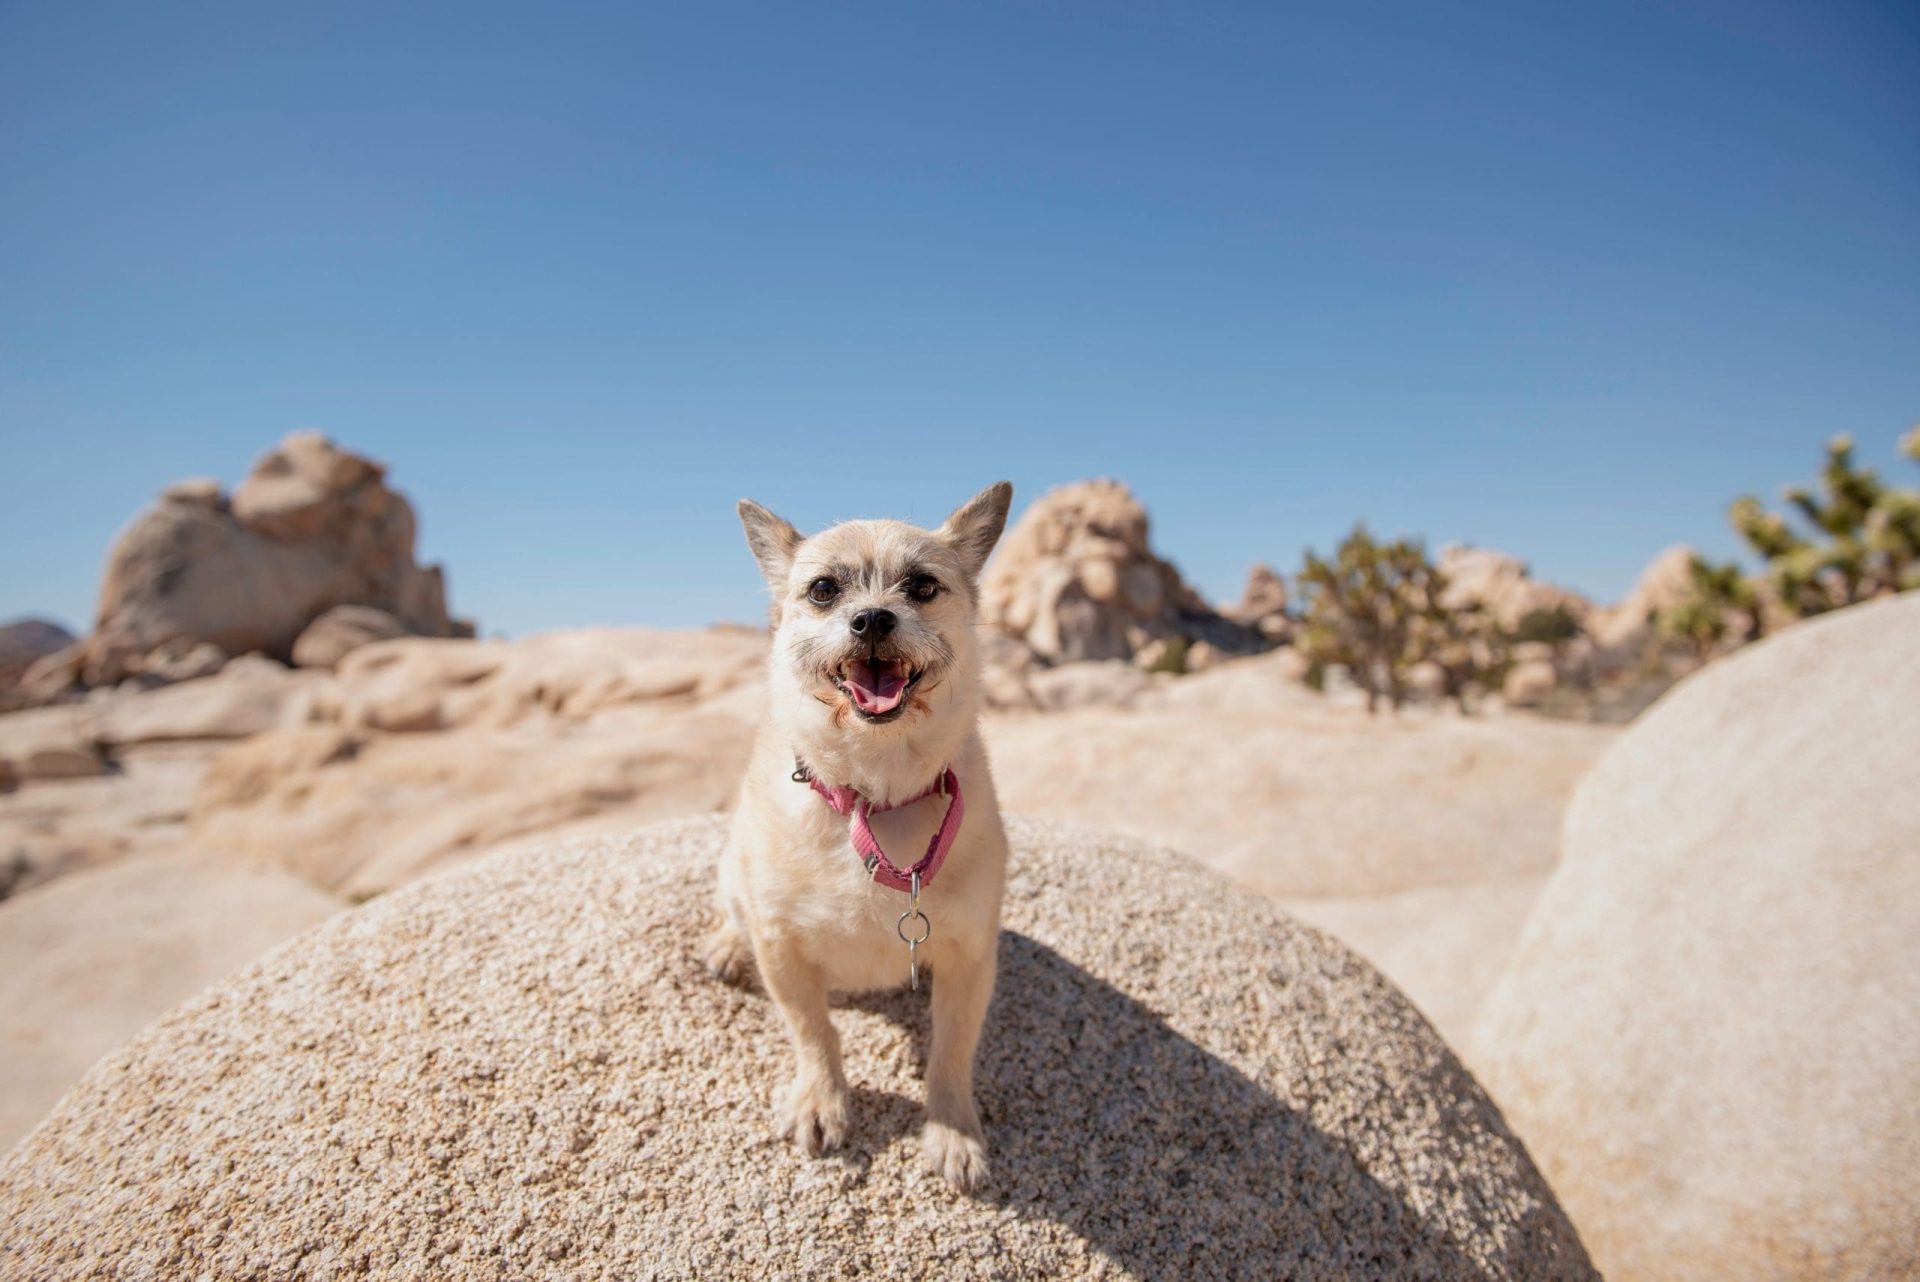 Are Dogs Allowed in Joshua Tree?